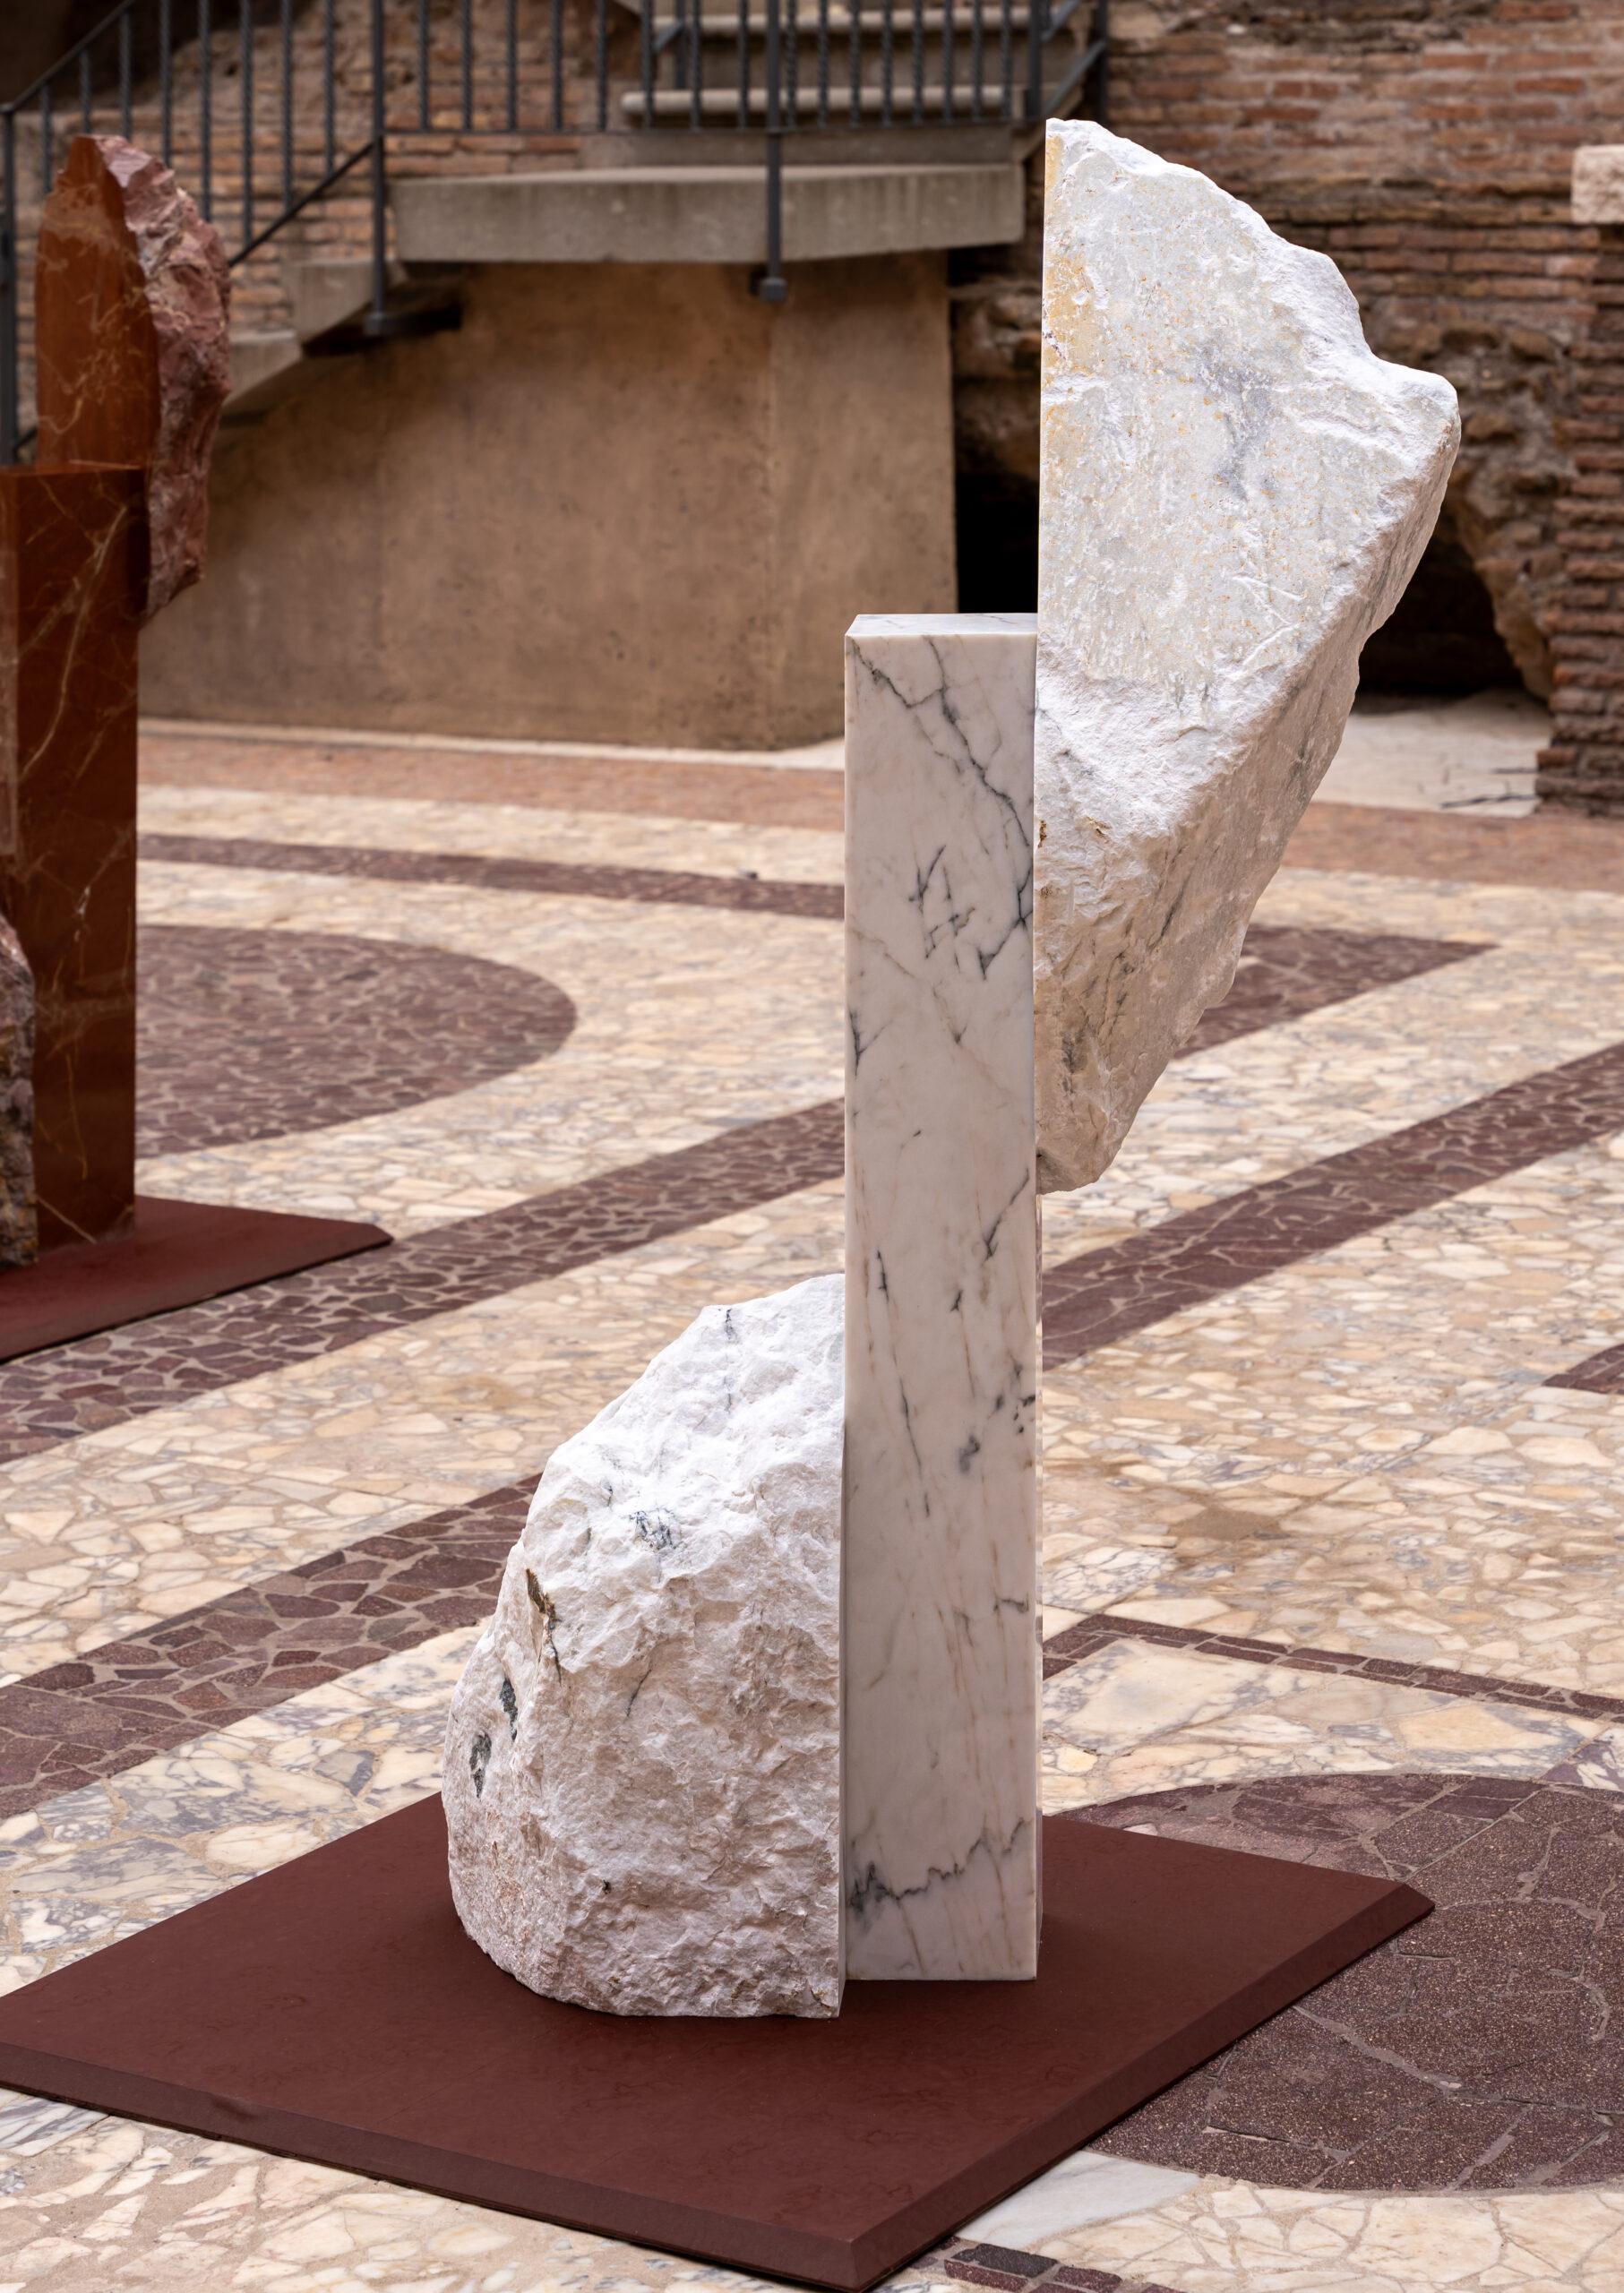 Korè-Paonazzo is a unique monumental sculpture by contemporary artist Mattia Bosco. This sculpture is made of Paonazzo marble, dimensions are 165 × 41 × 85 cm (65 × 16.1 × 33.5 in). 

This piece is a part of a collection of twelve sculptures, two of